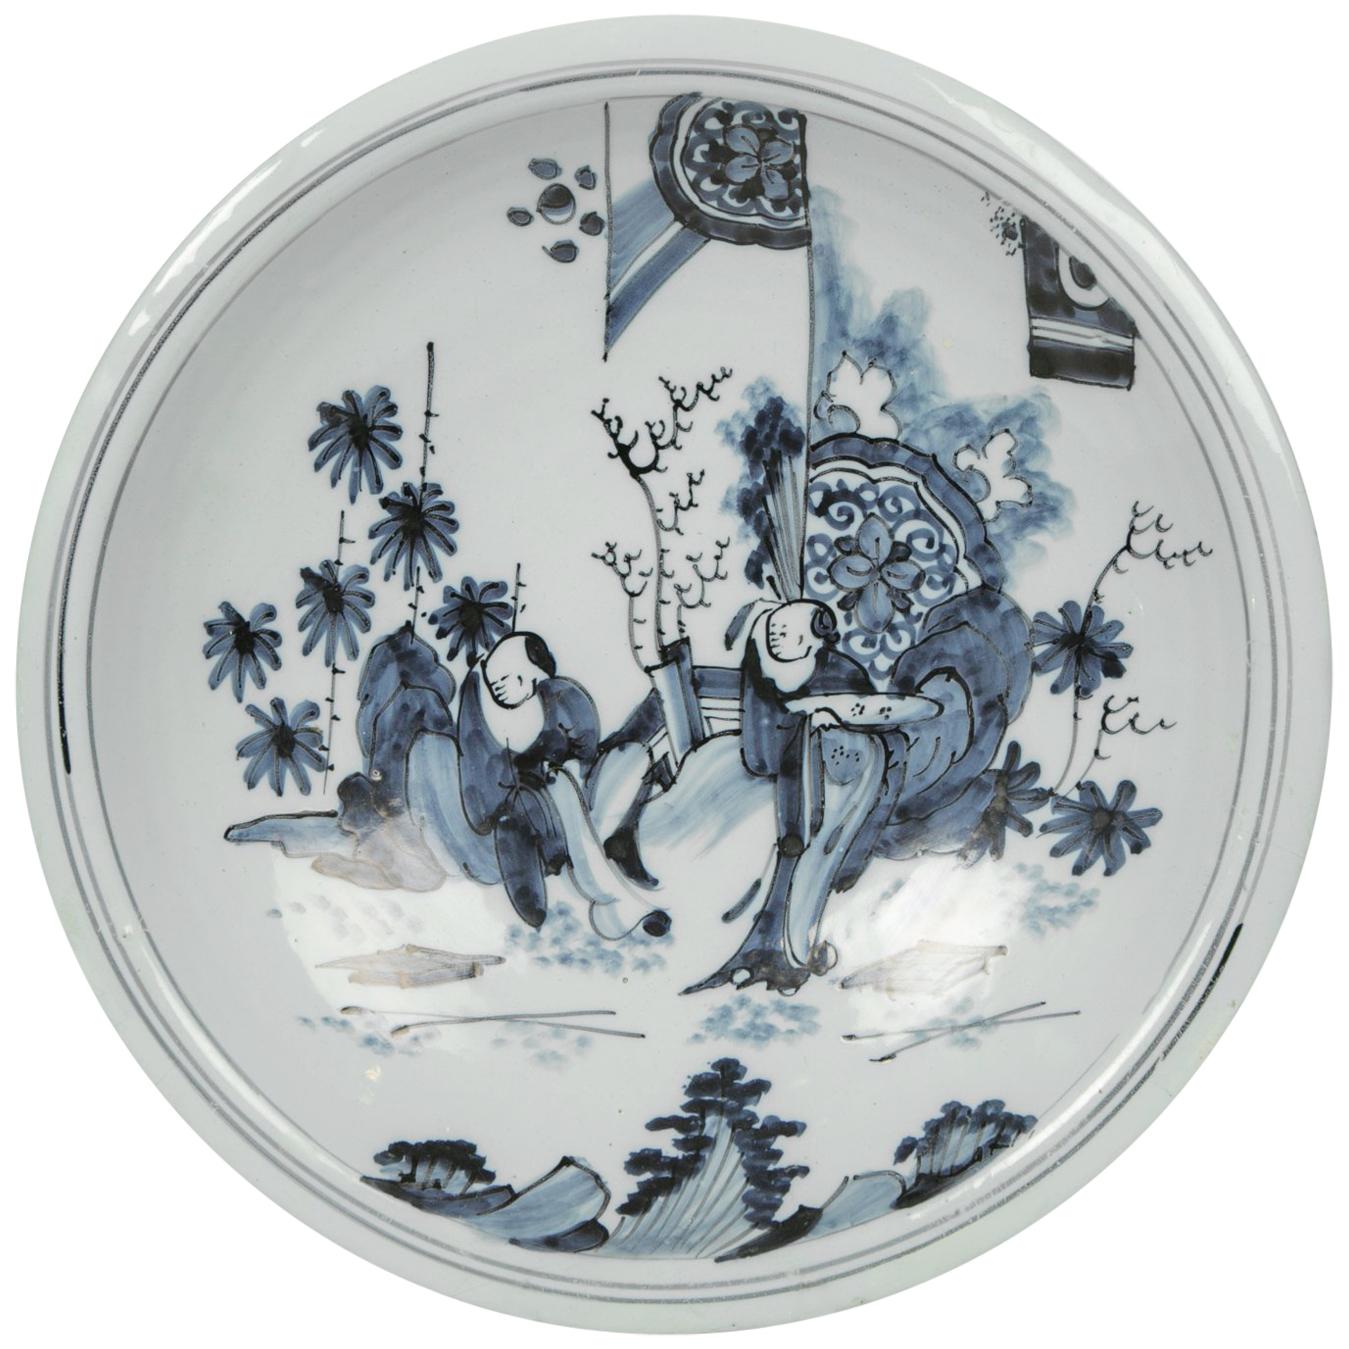 Blue and White Delft Charger with Chinese Inspired Scene Made circa 1640-1650